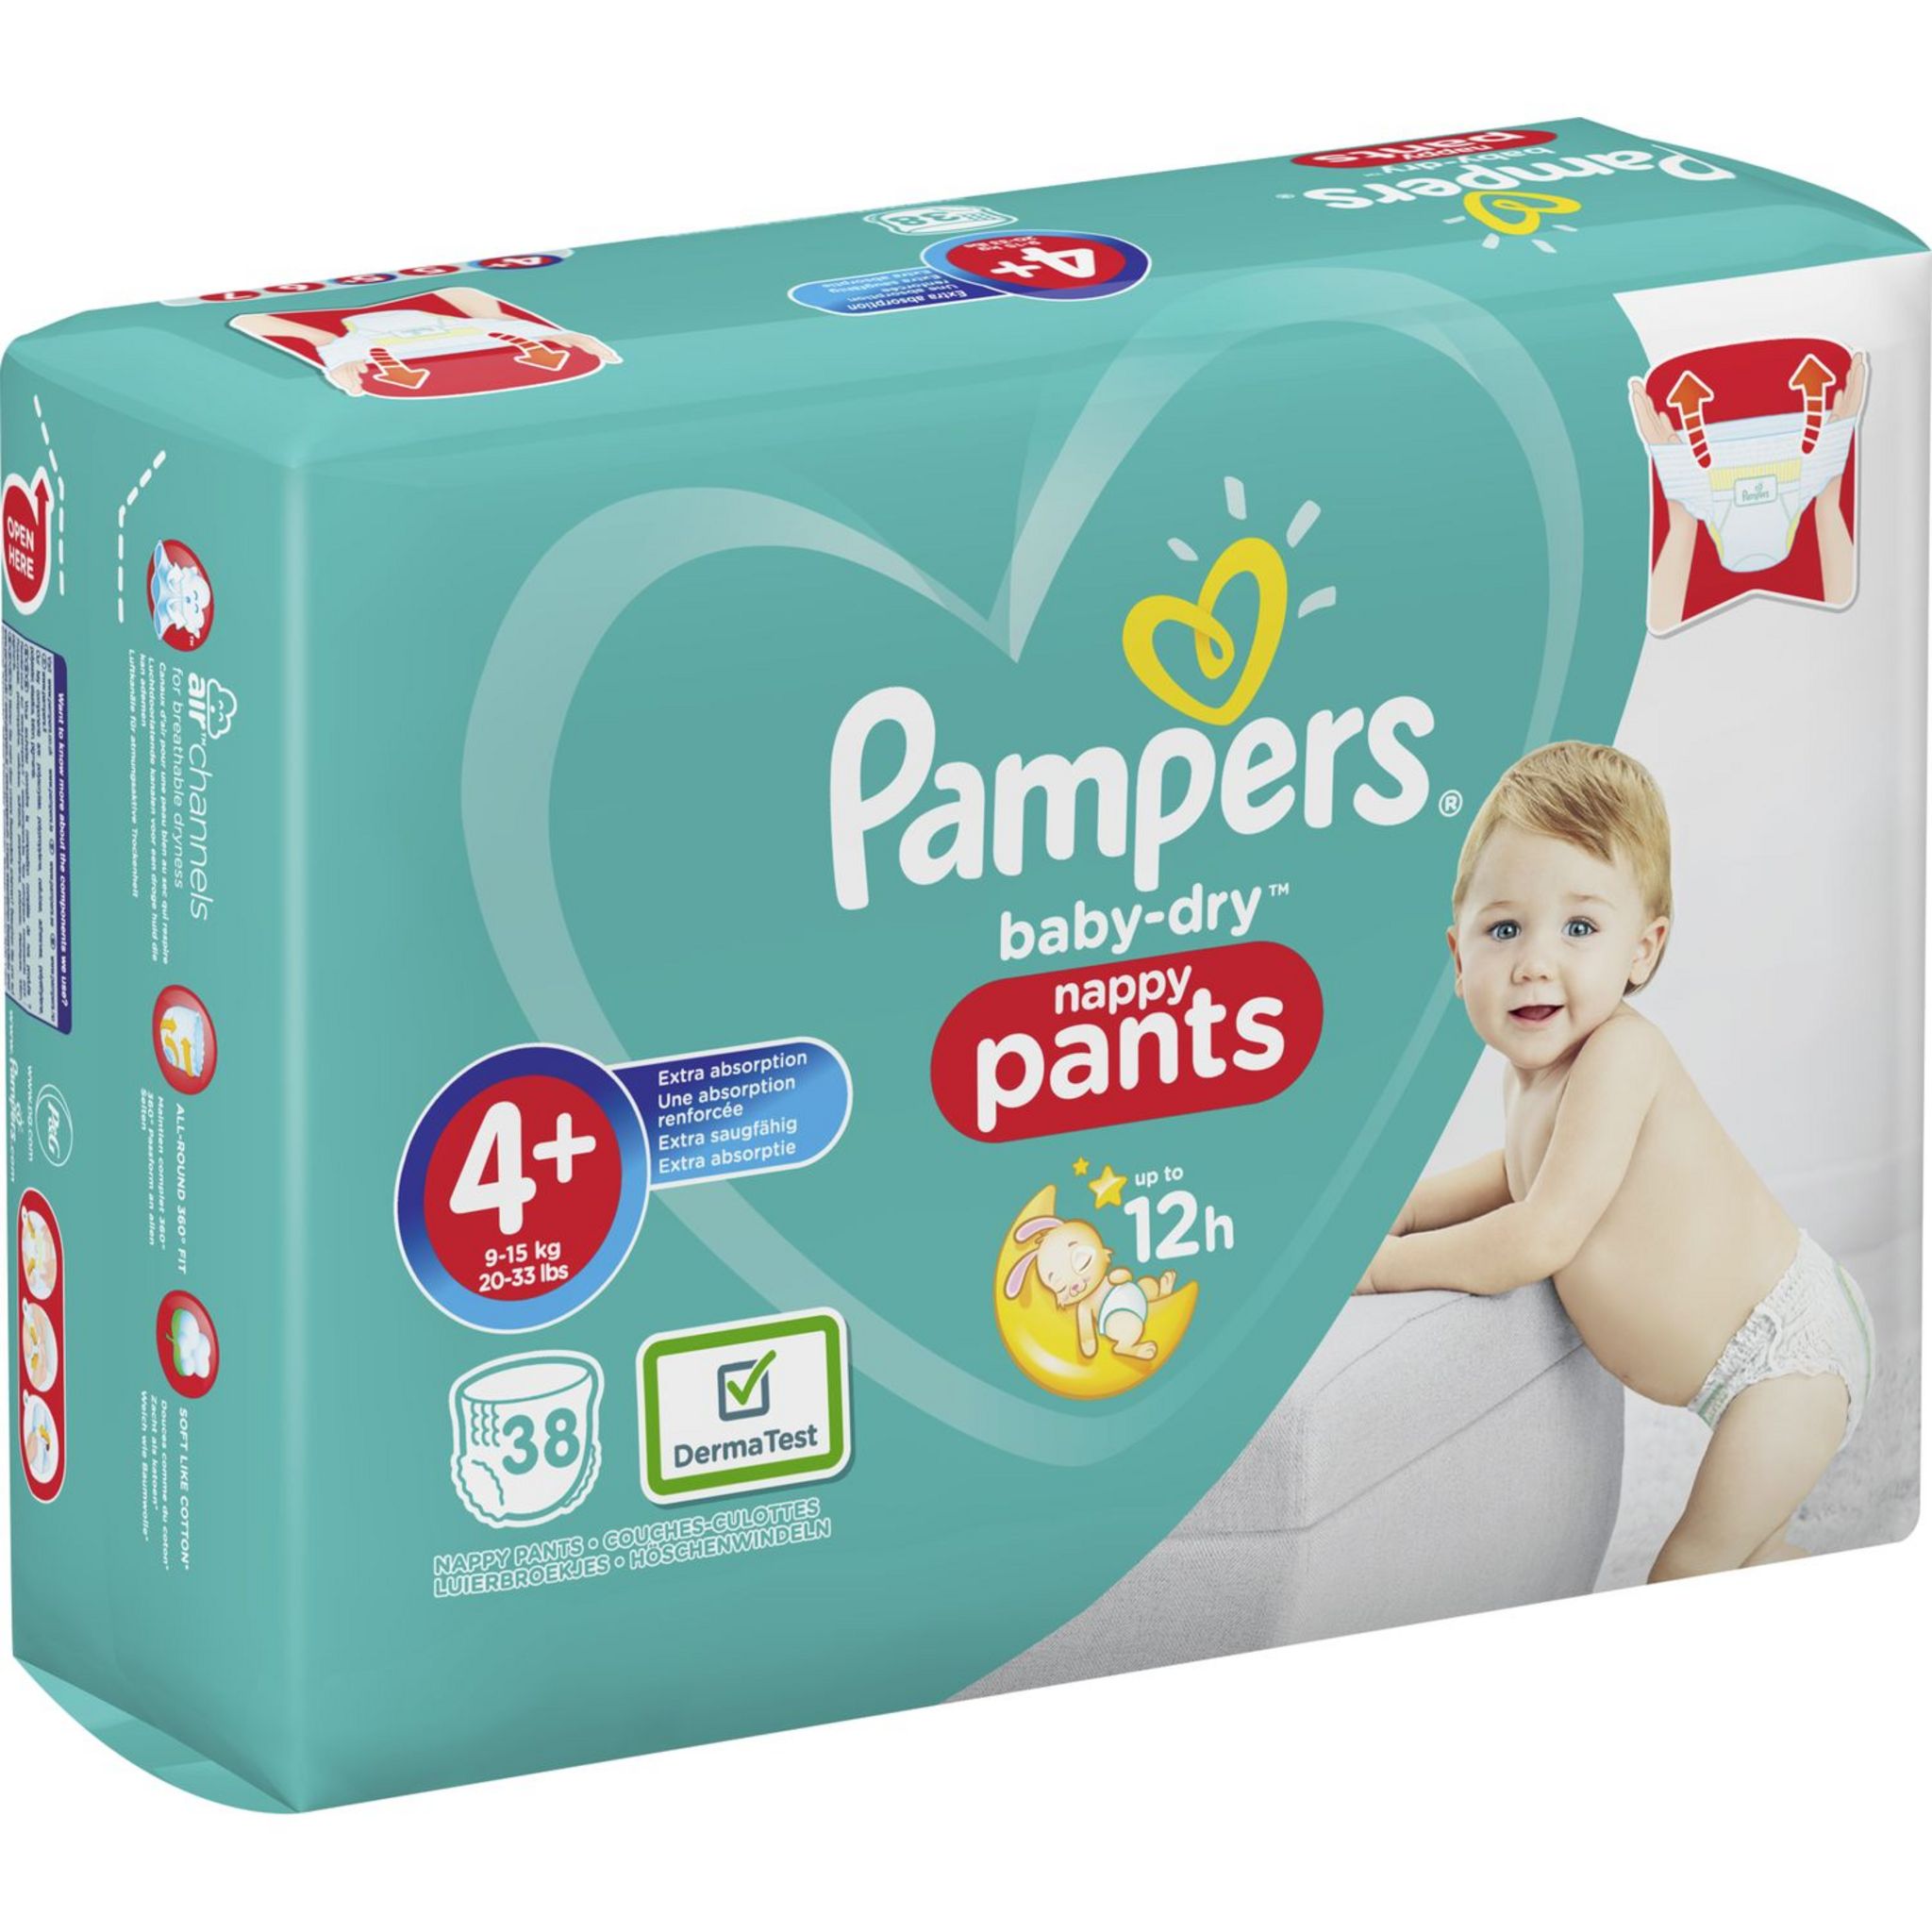 Achat / Vente Pampers Babydry Couches culottes T6 +15kg, 34 pièces